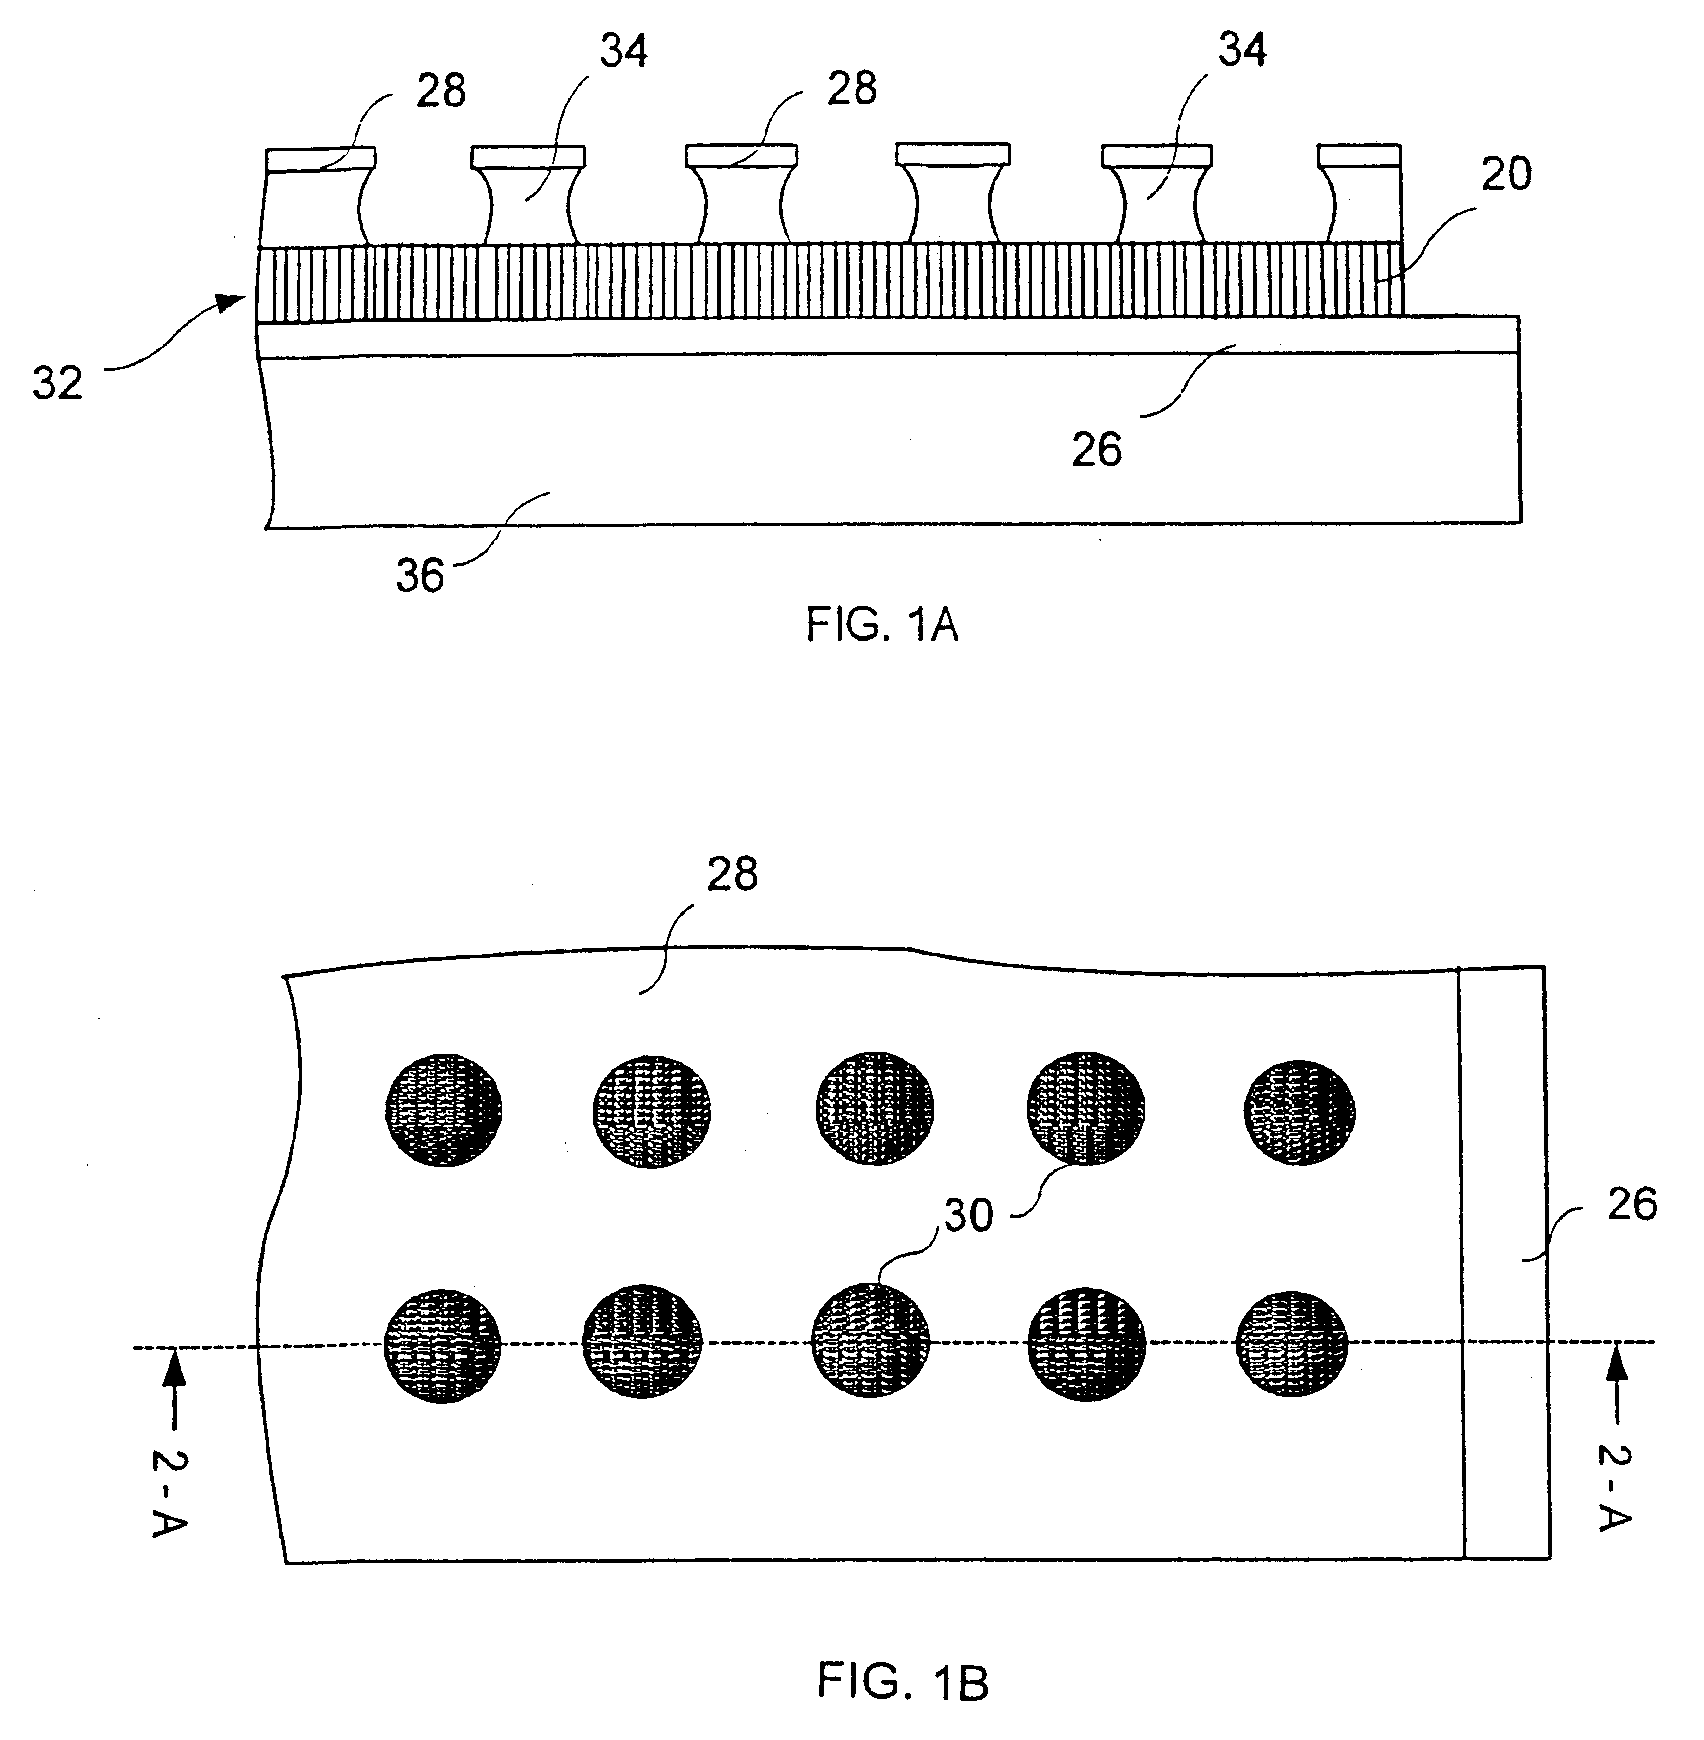 Electron emitting composite based on regulated nano-structures and a cold electron source using the composite